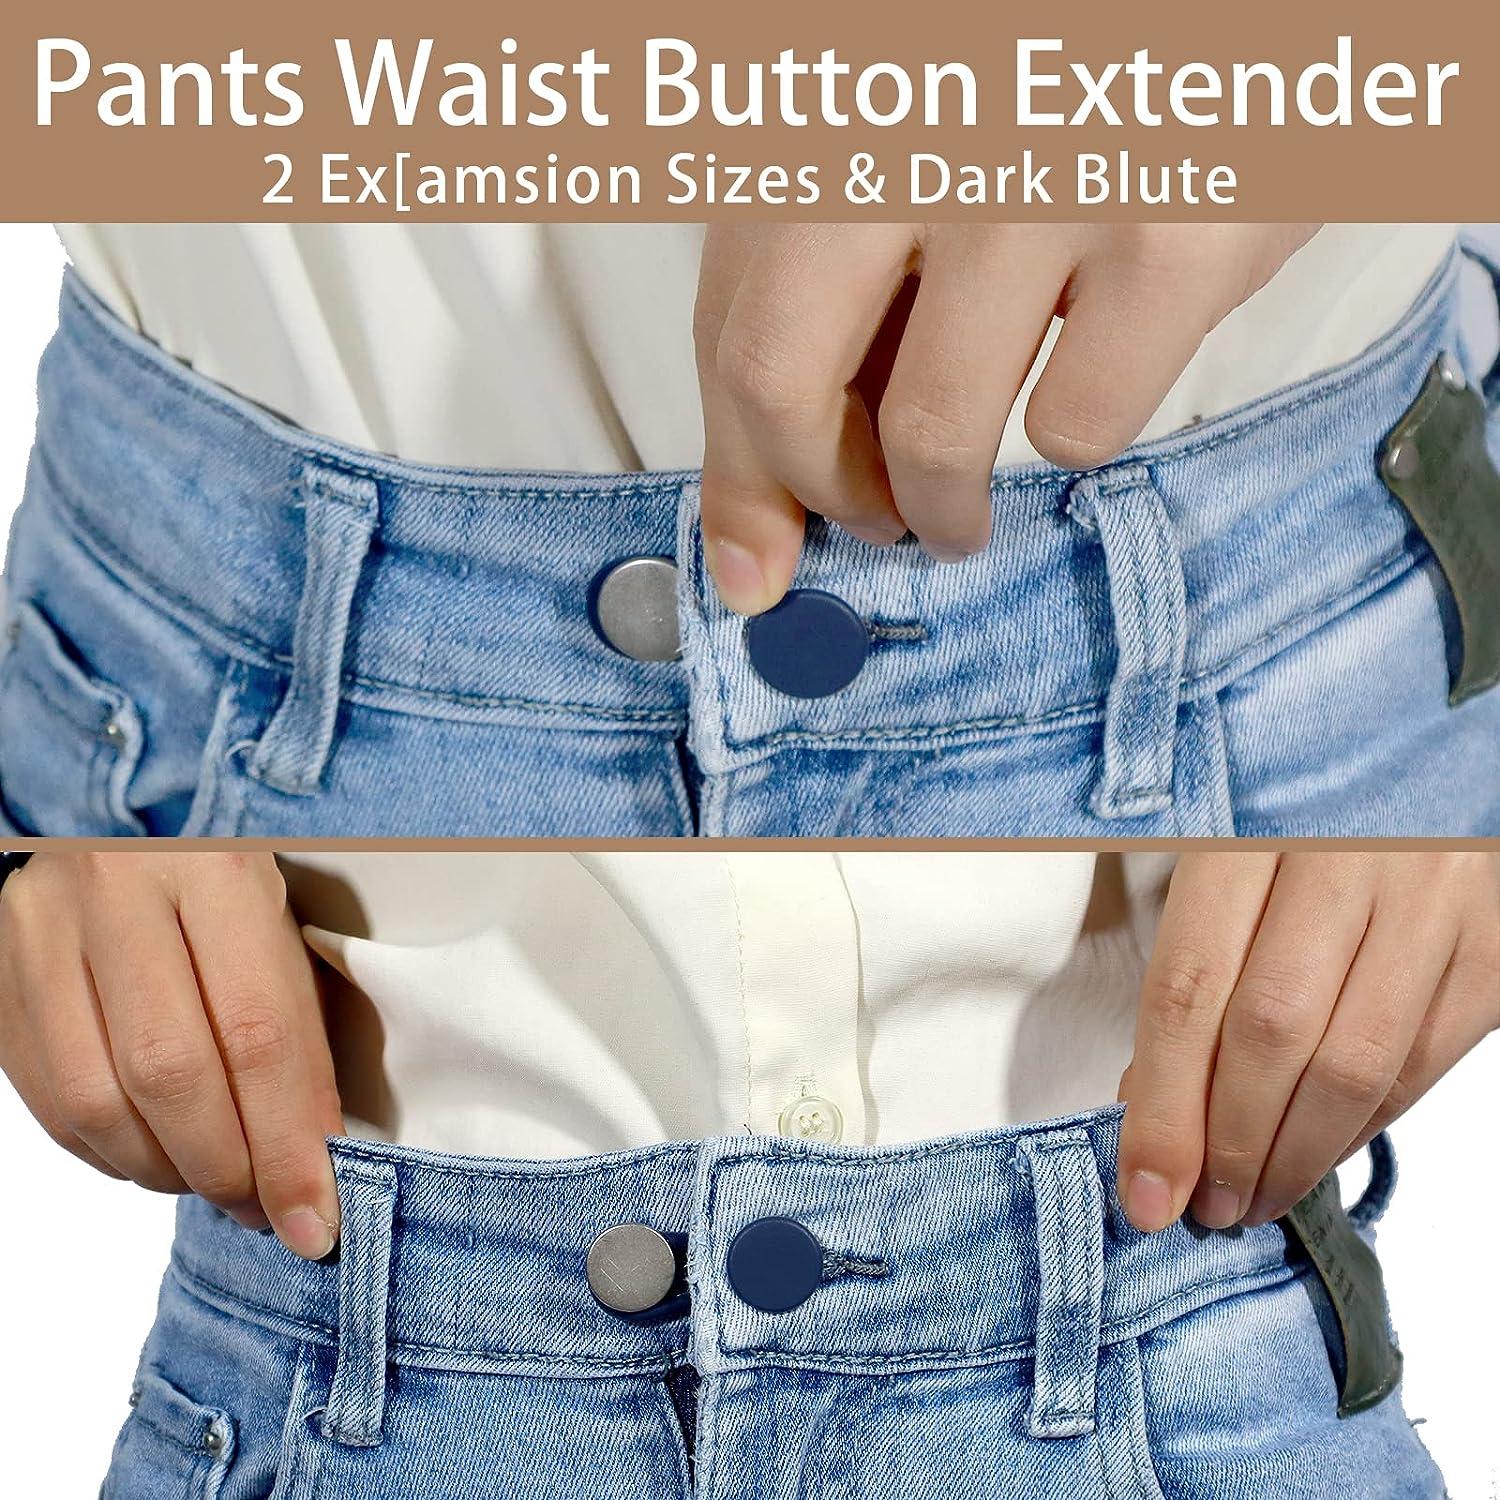 4pcs Black Elastic Waist Extender With Buttons For Trouser